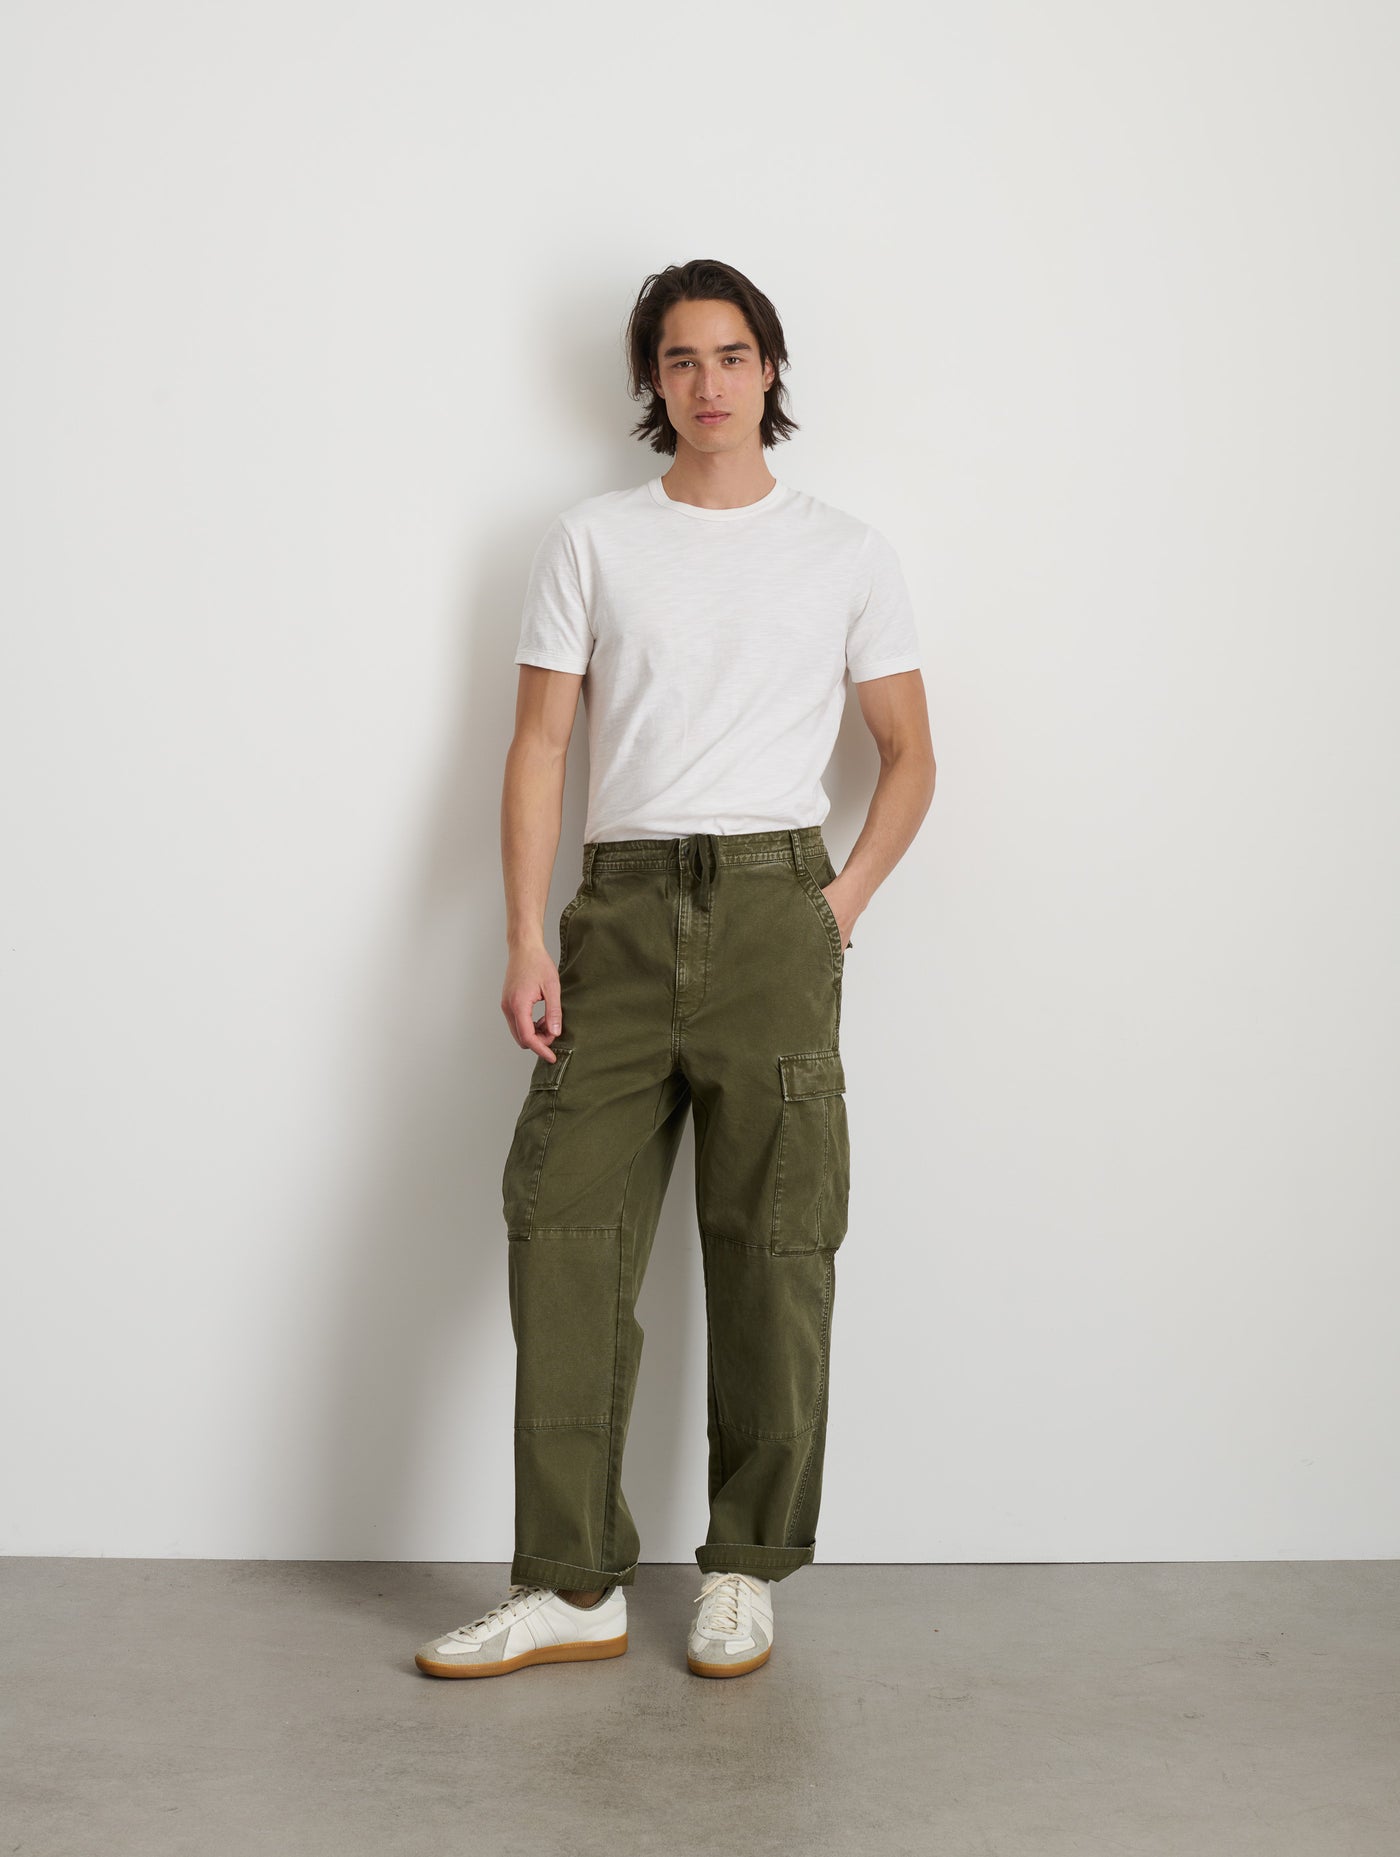 Pull-On Button Fly Pant – Alex Mill